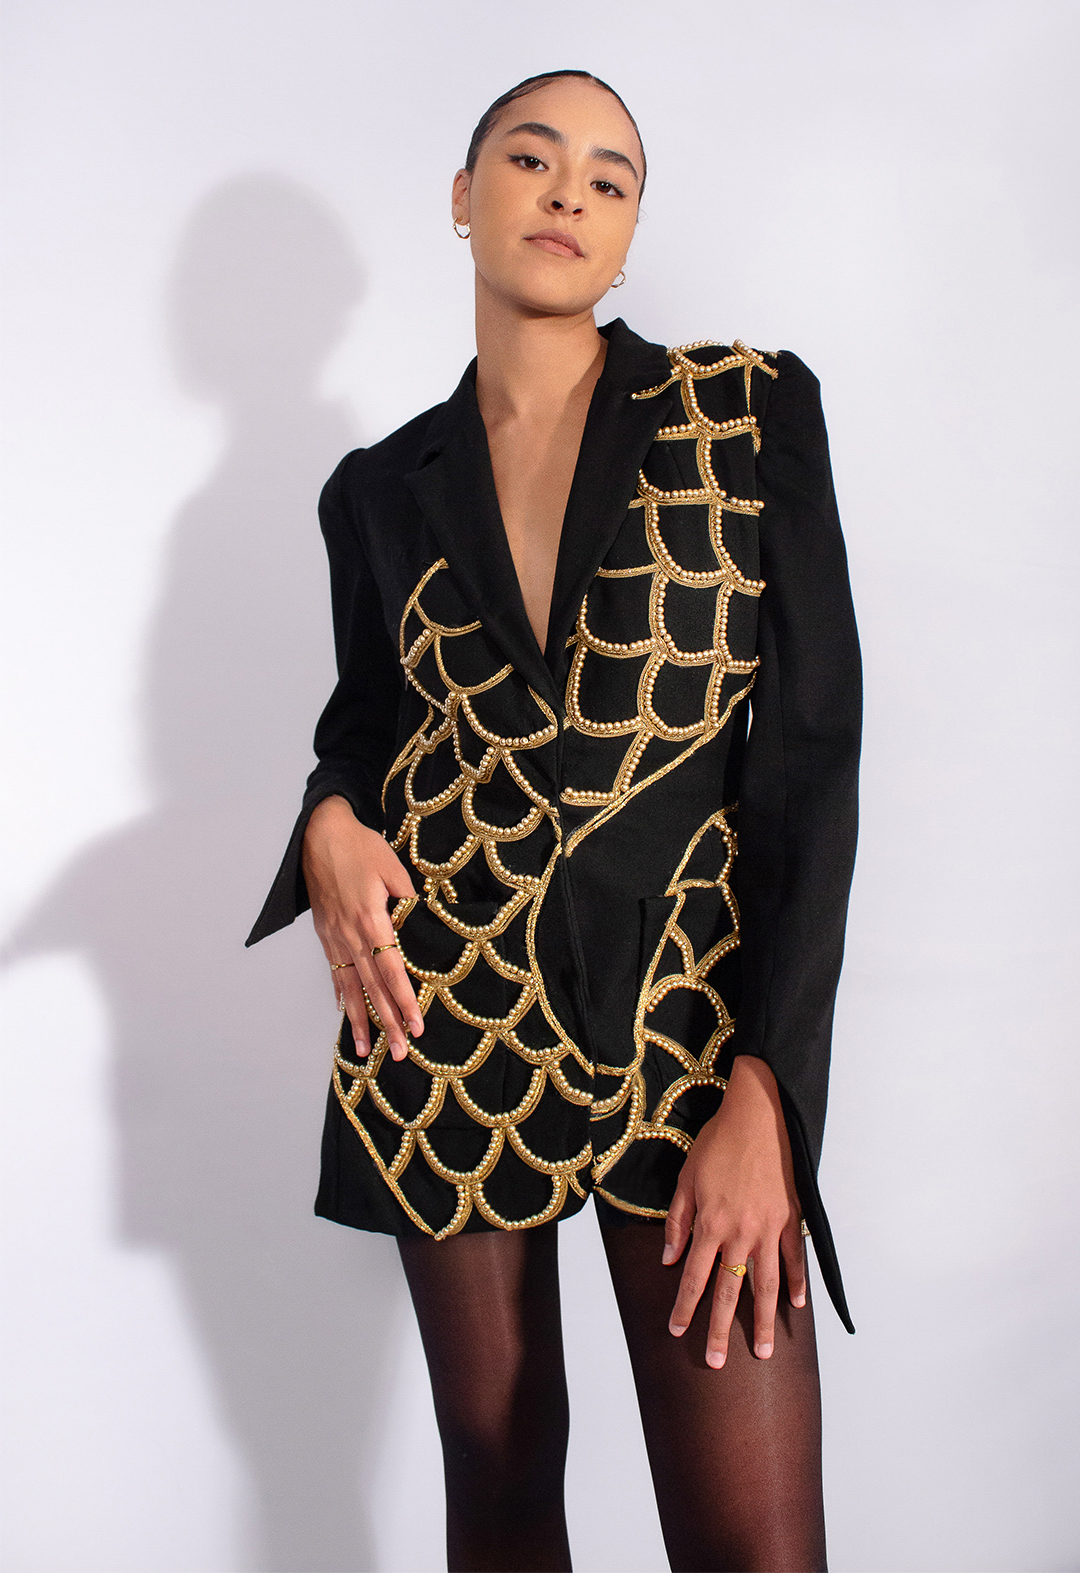 The front view of a black wool jacket portraying the body of the Naga is connected to the back of the jacket. The body is covered in scales that are made out of gold metallic trims and gold glass pearls. It also has a pointed hem on the sleeves.